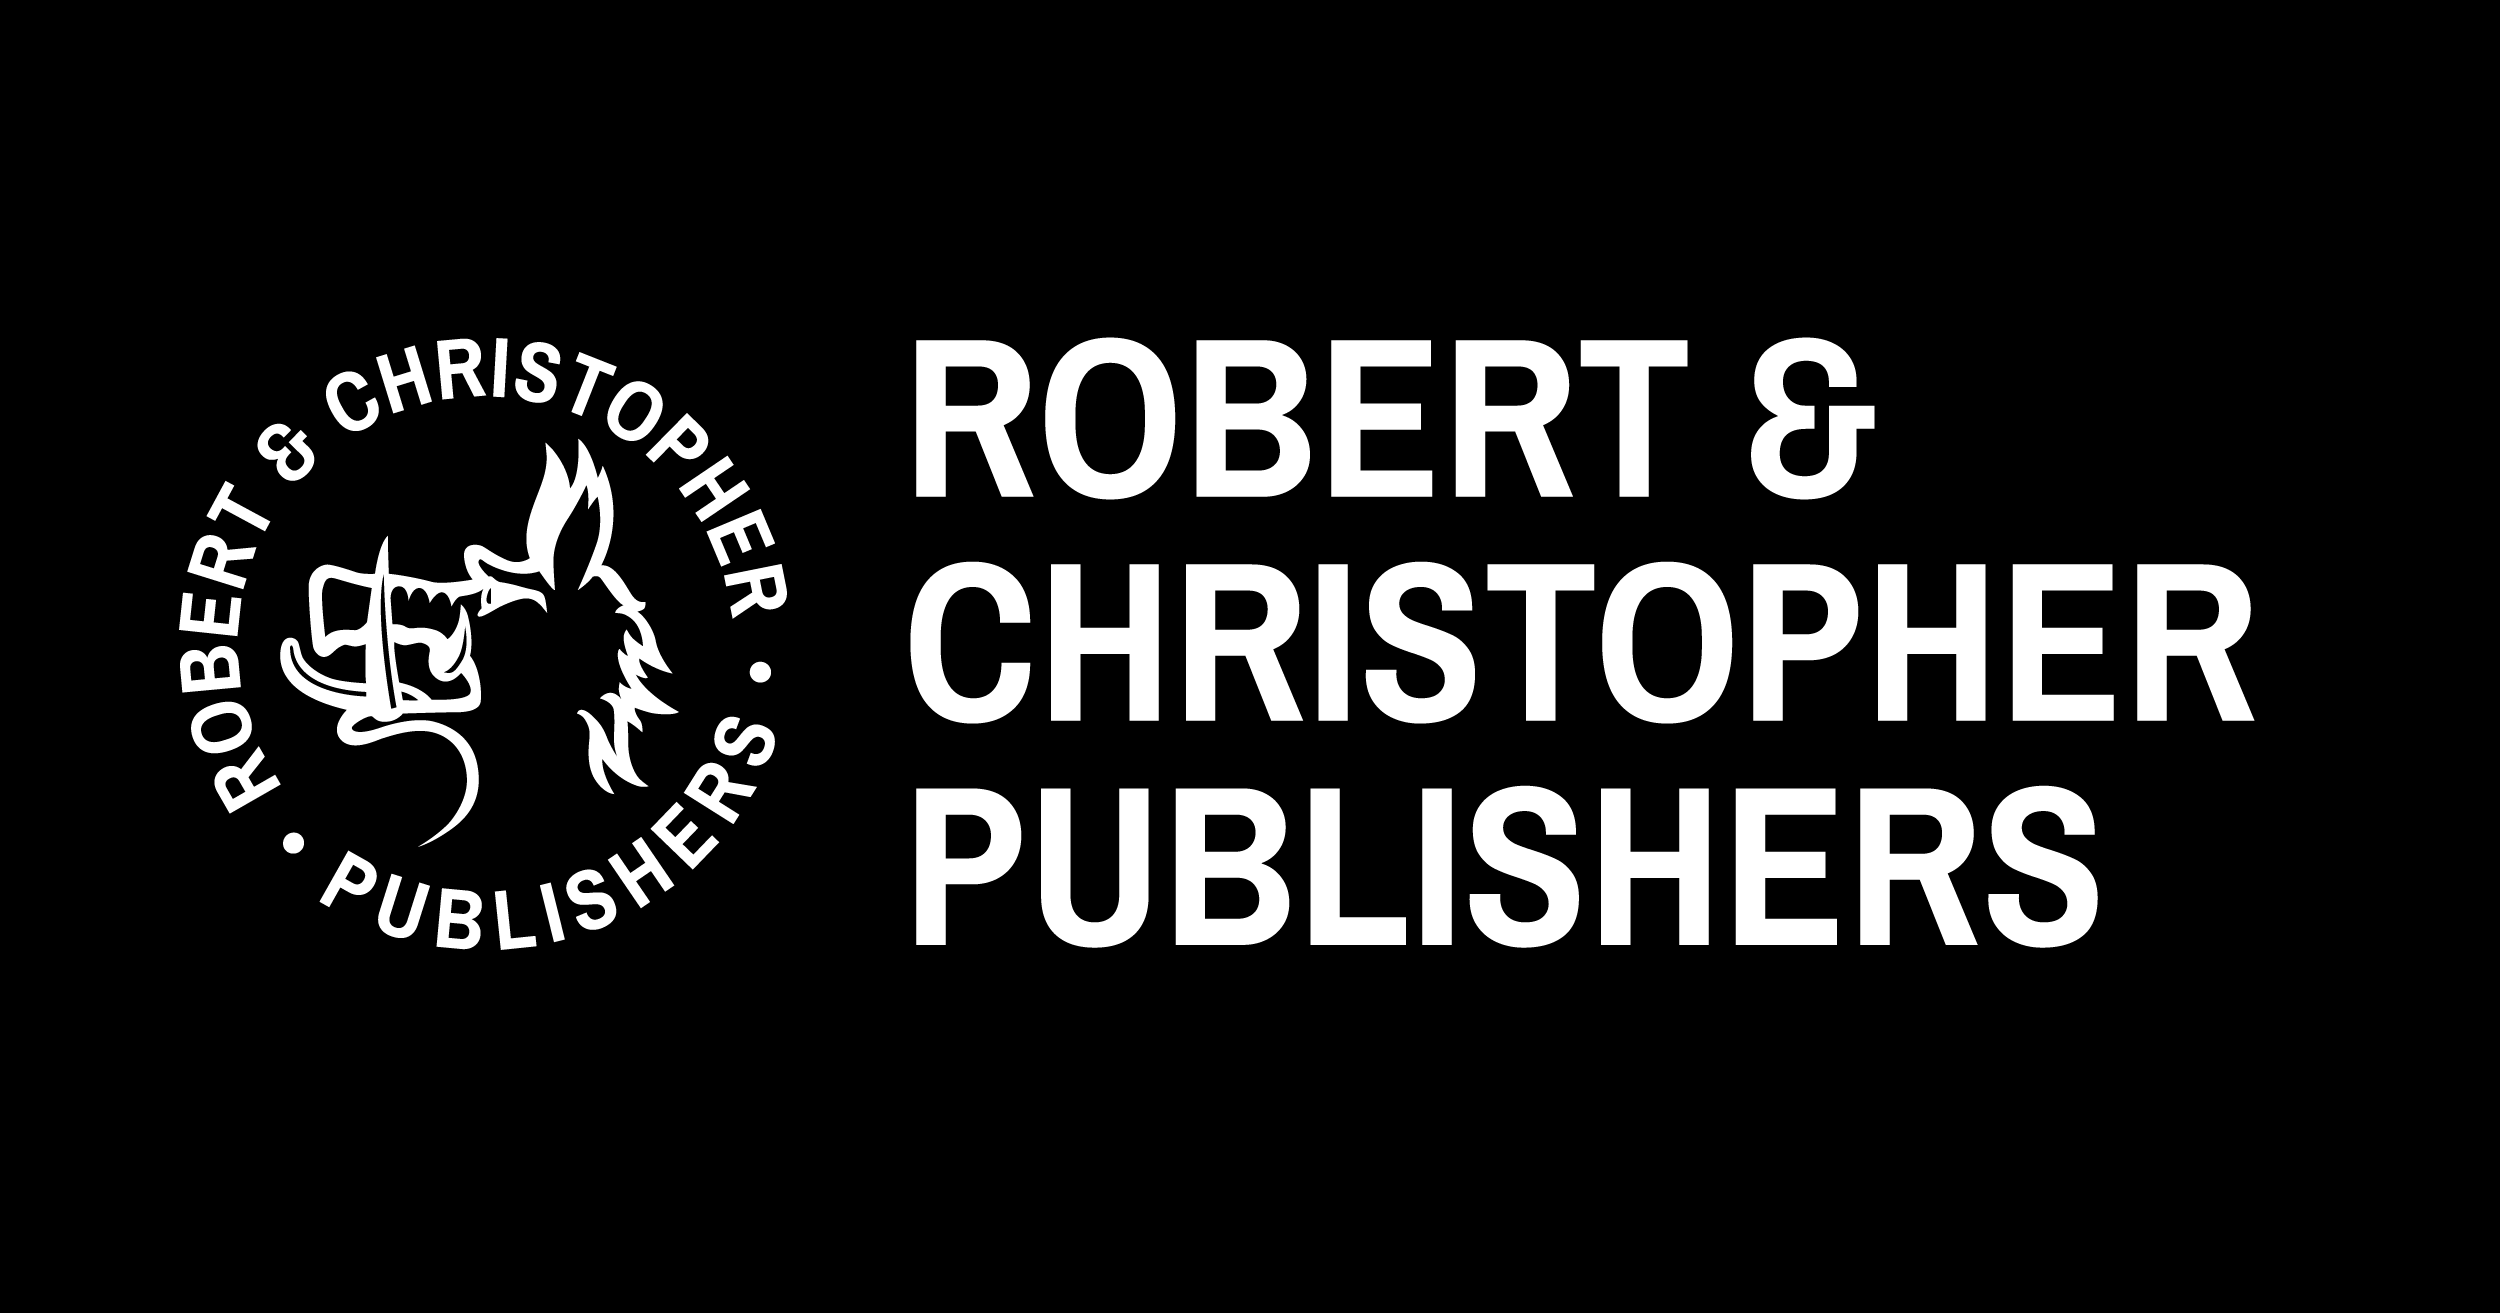 A to Z of Caribbean Art Notebook - Robert & Christopher Publishers